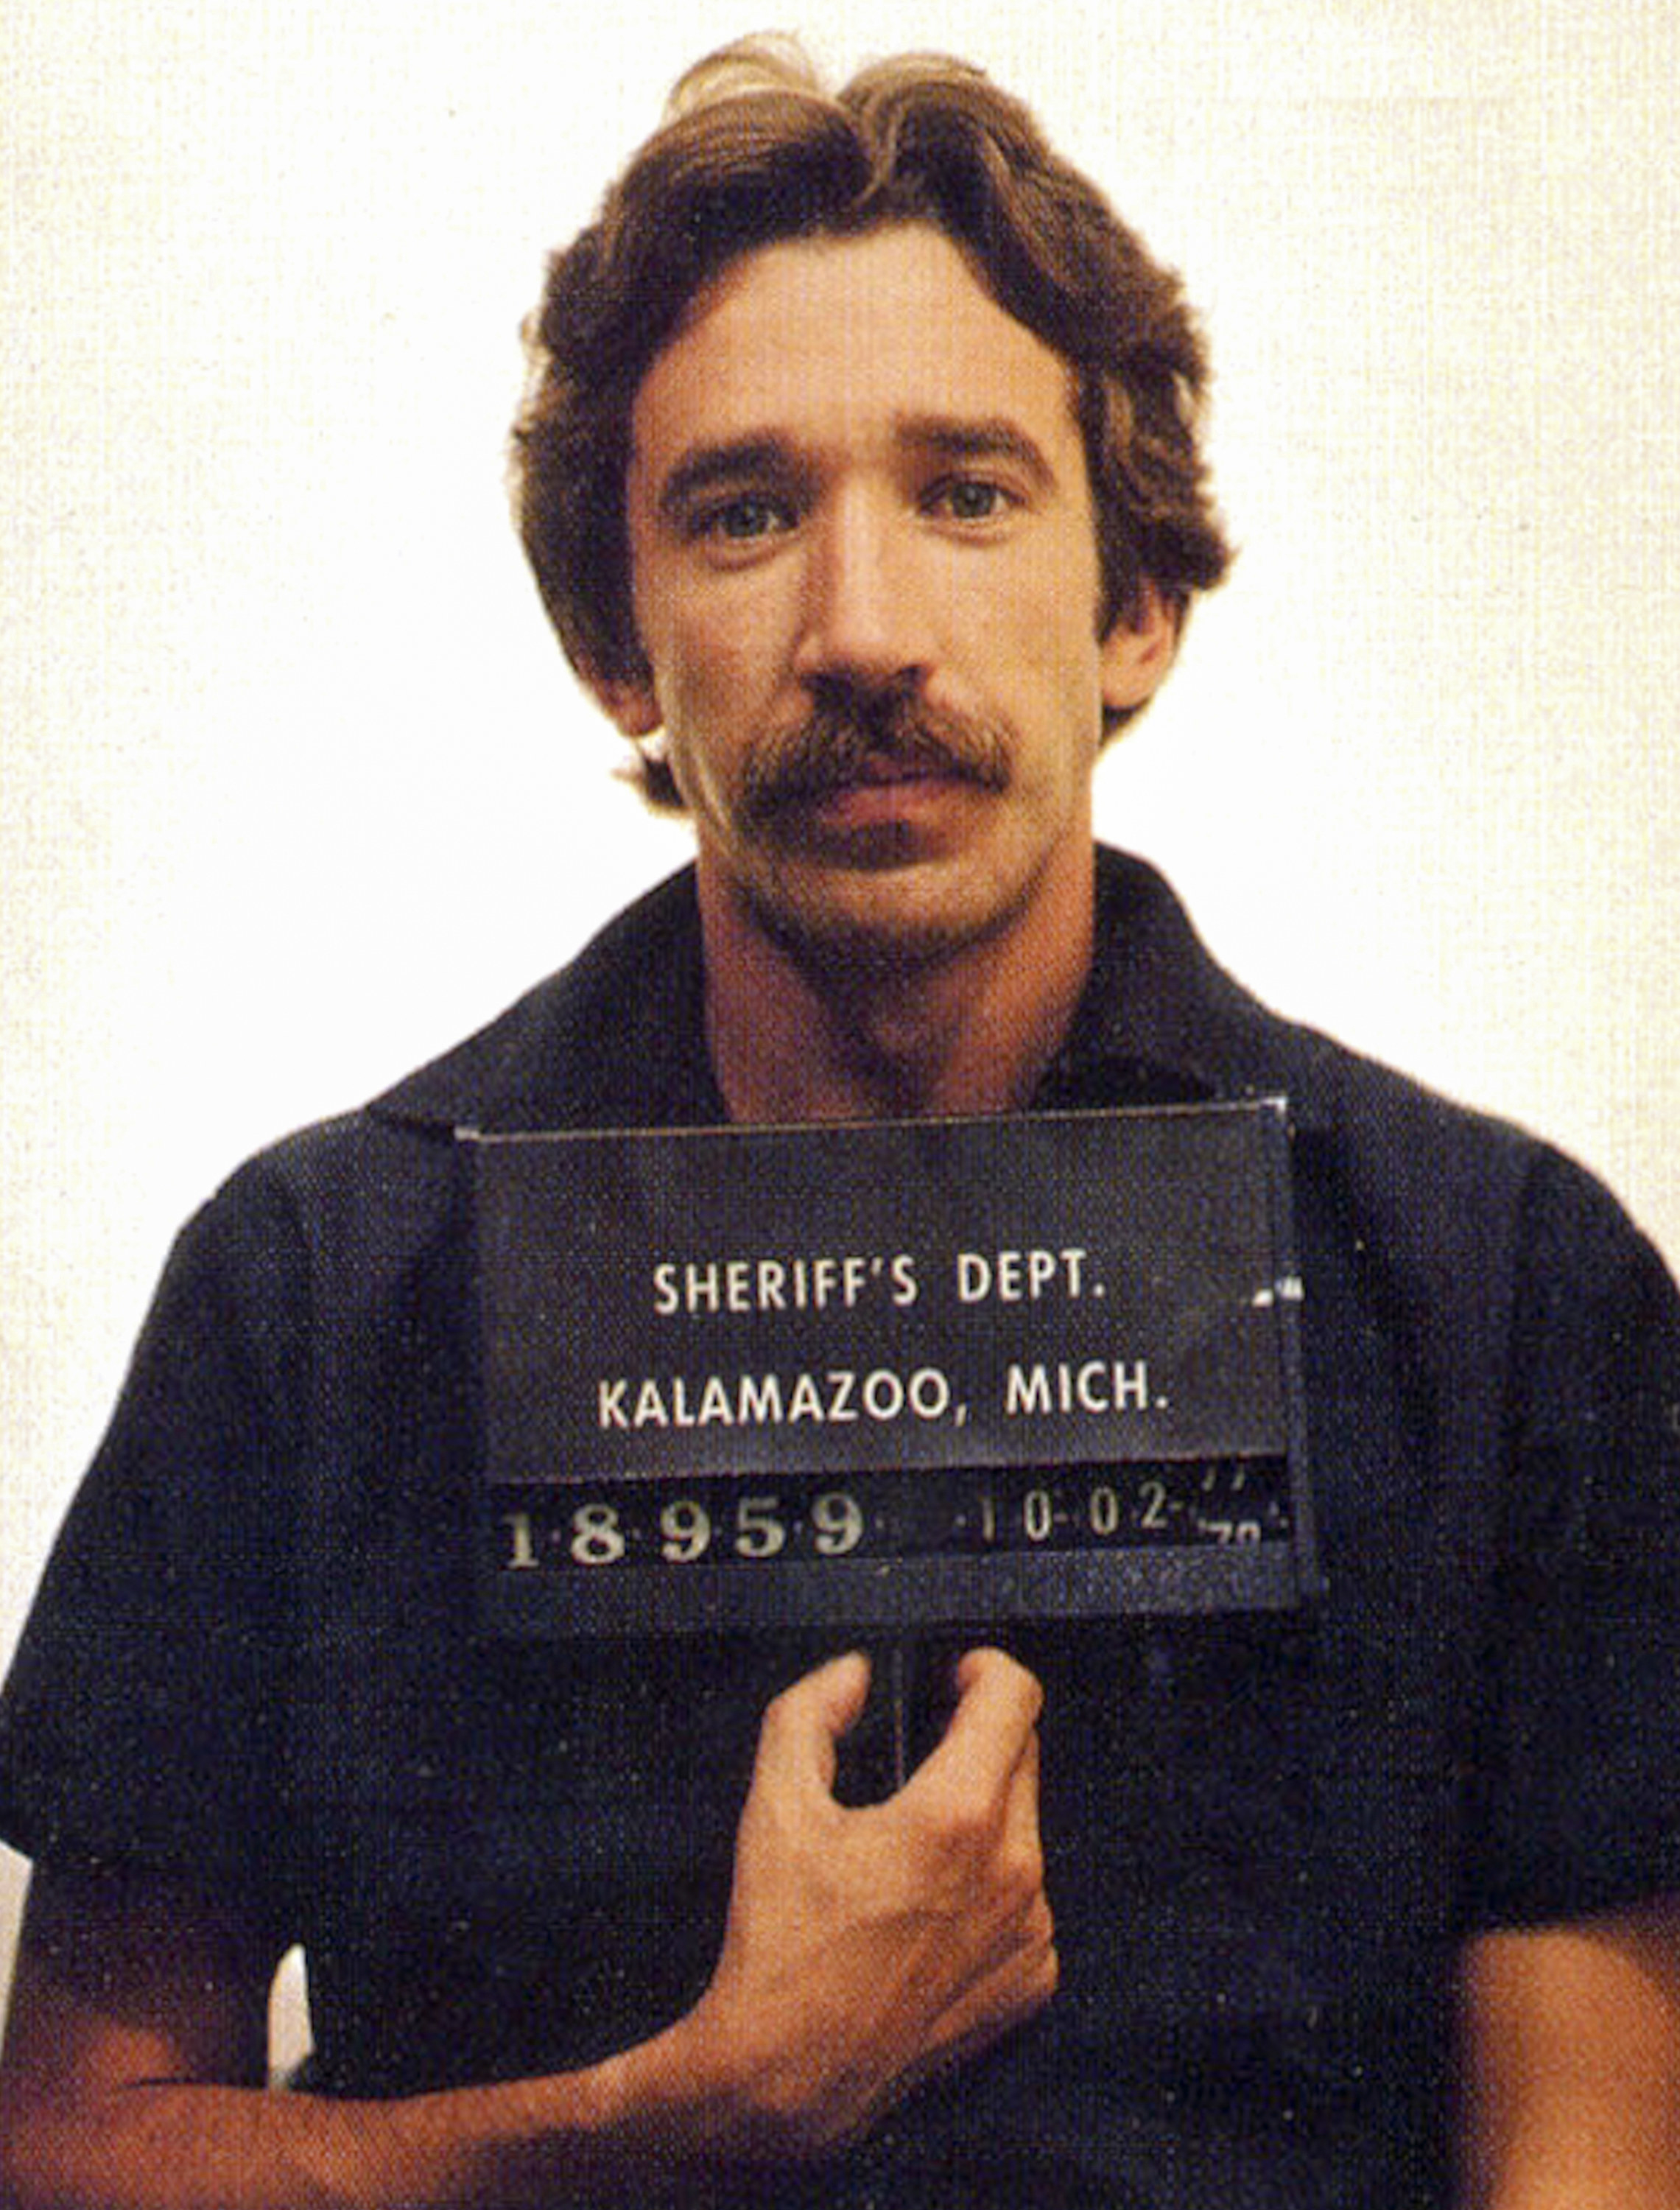 A young, mustachioed Tim Allen holding a ID placard in a mugshot